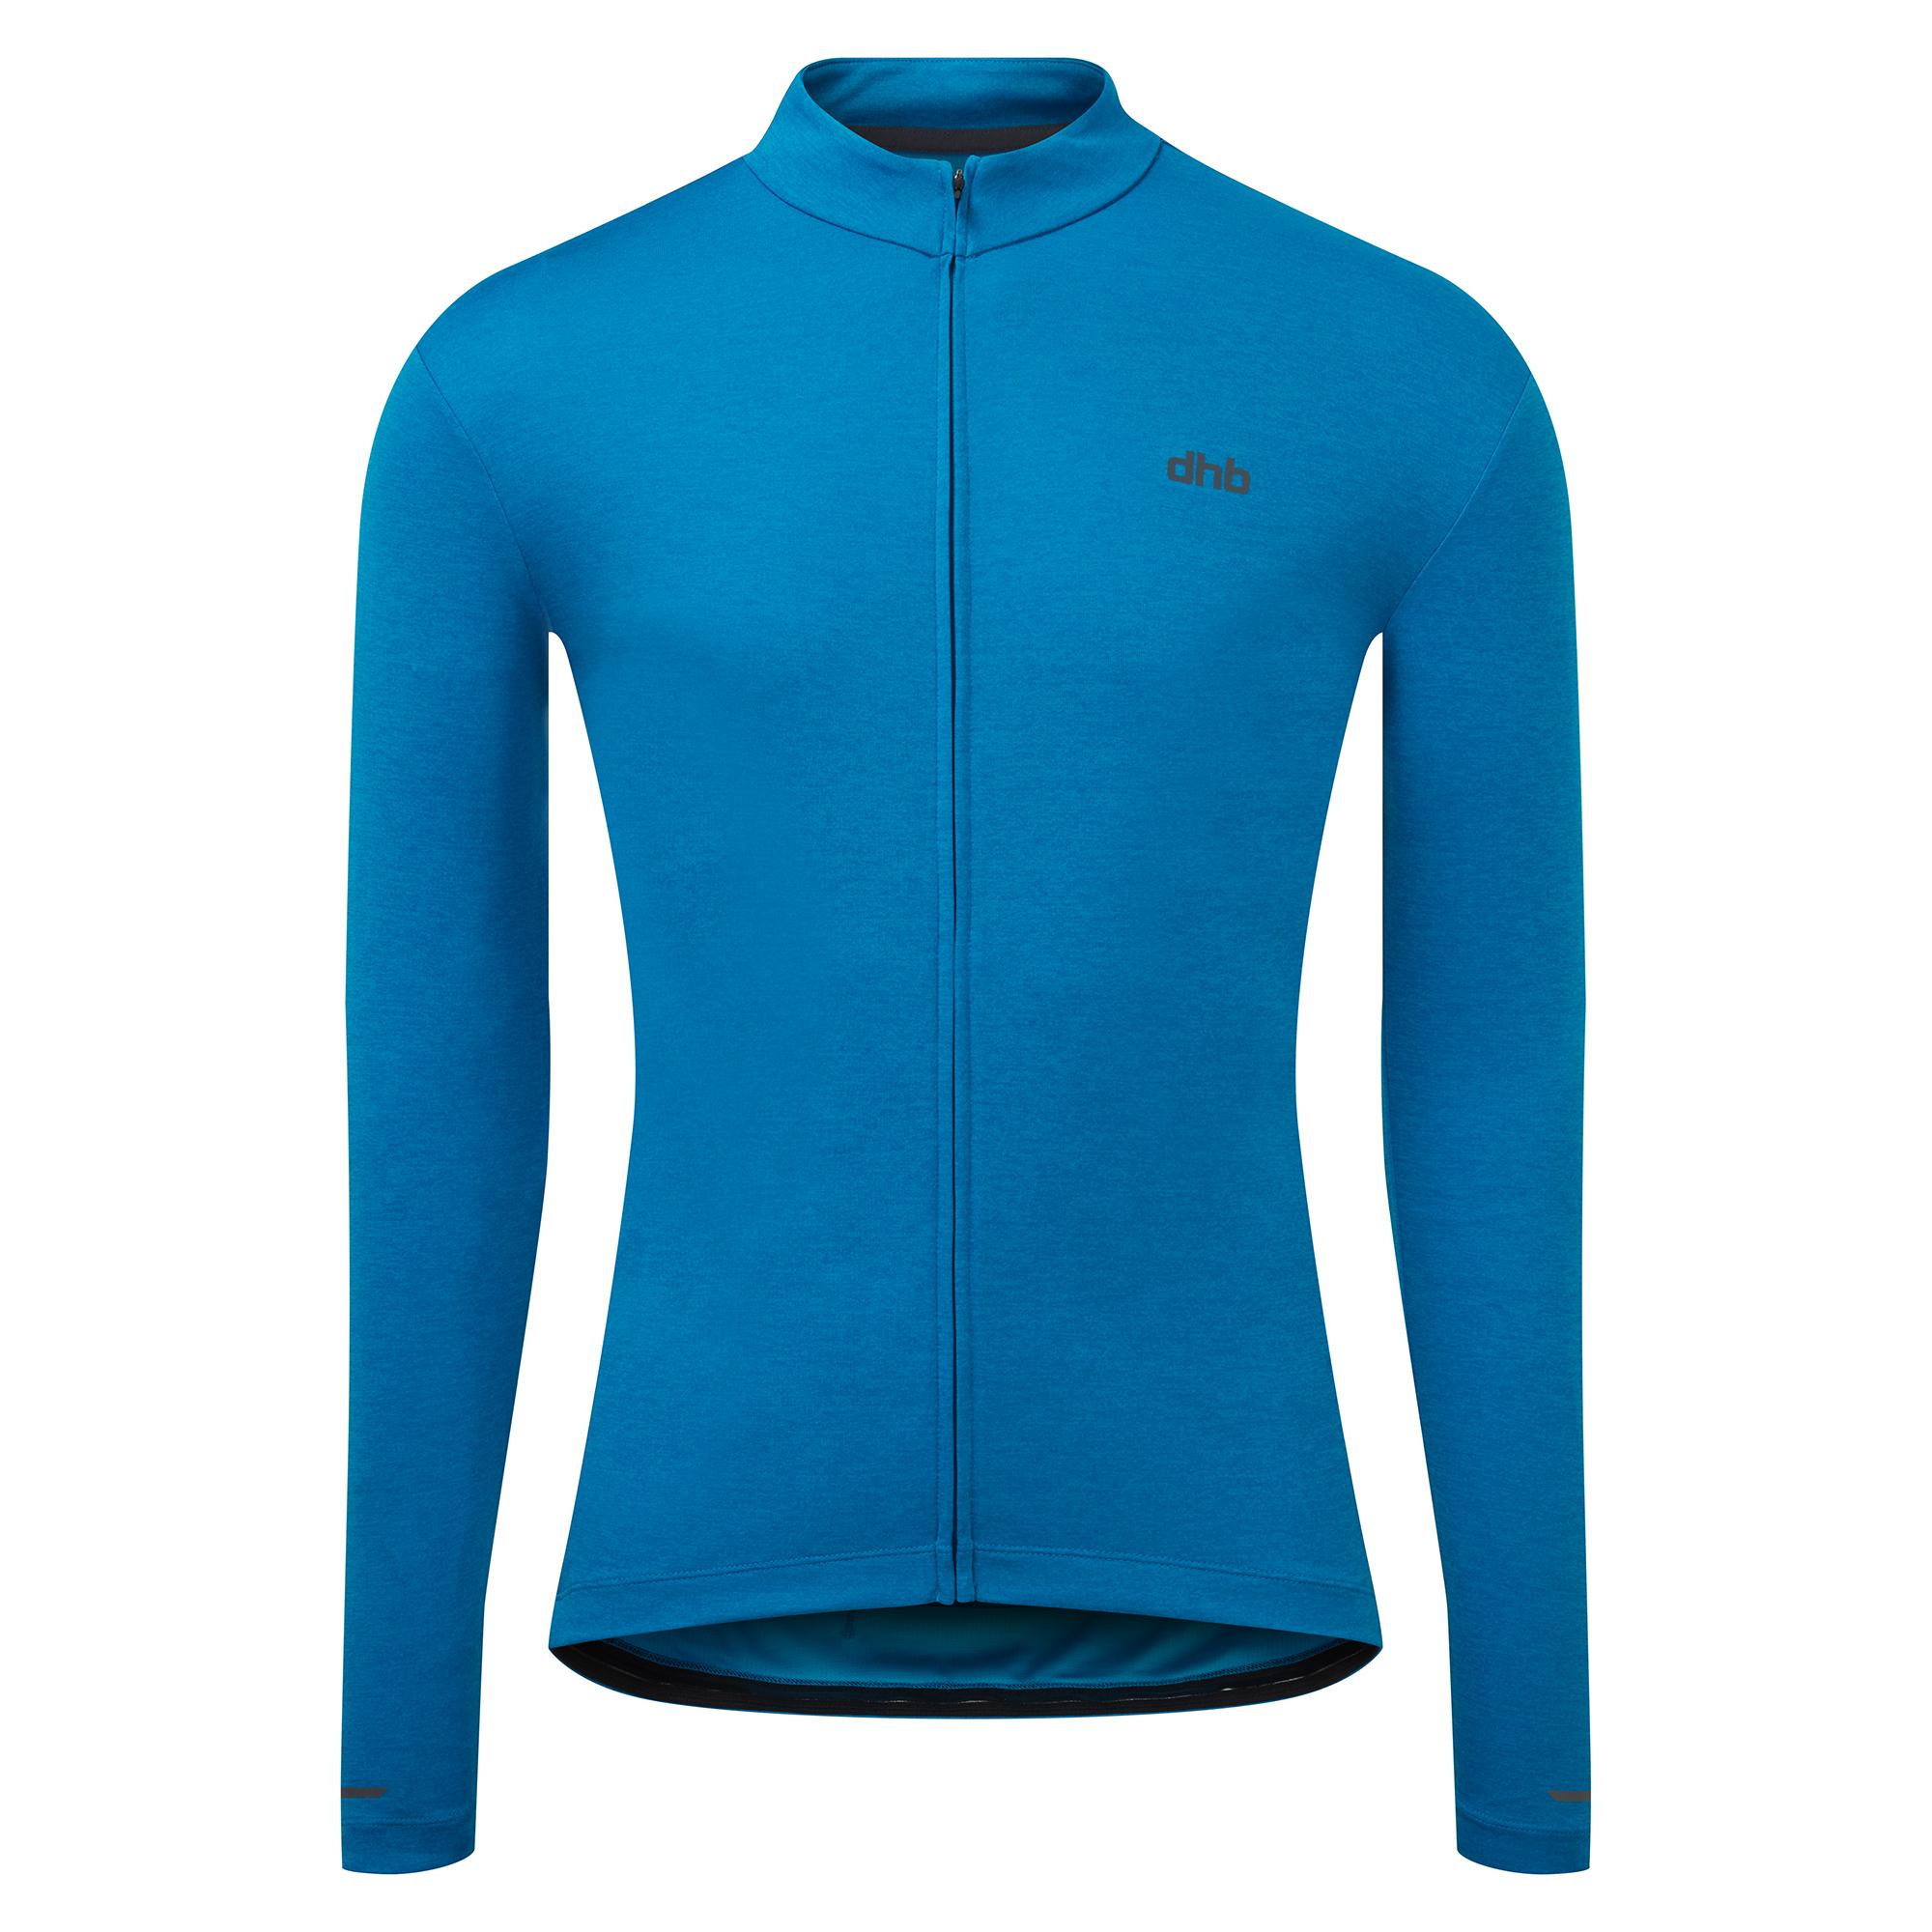 Dhb Long Sleeve Jersey - Directoire Blue